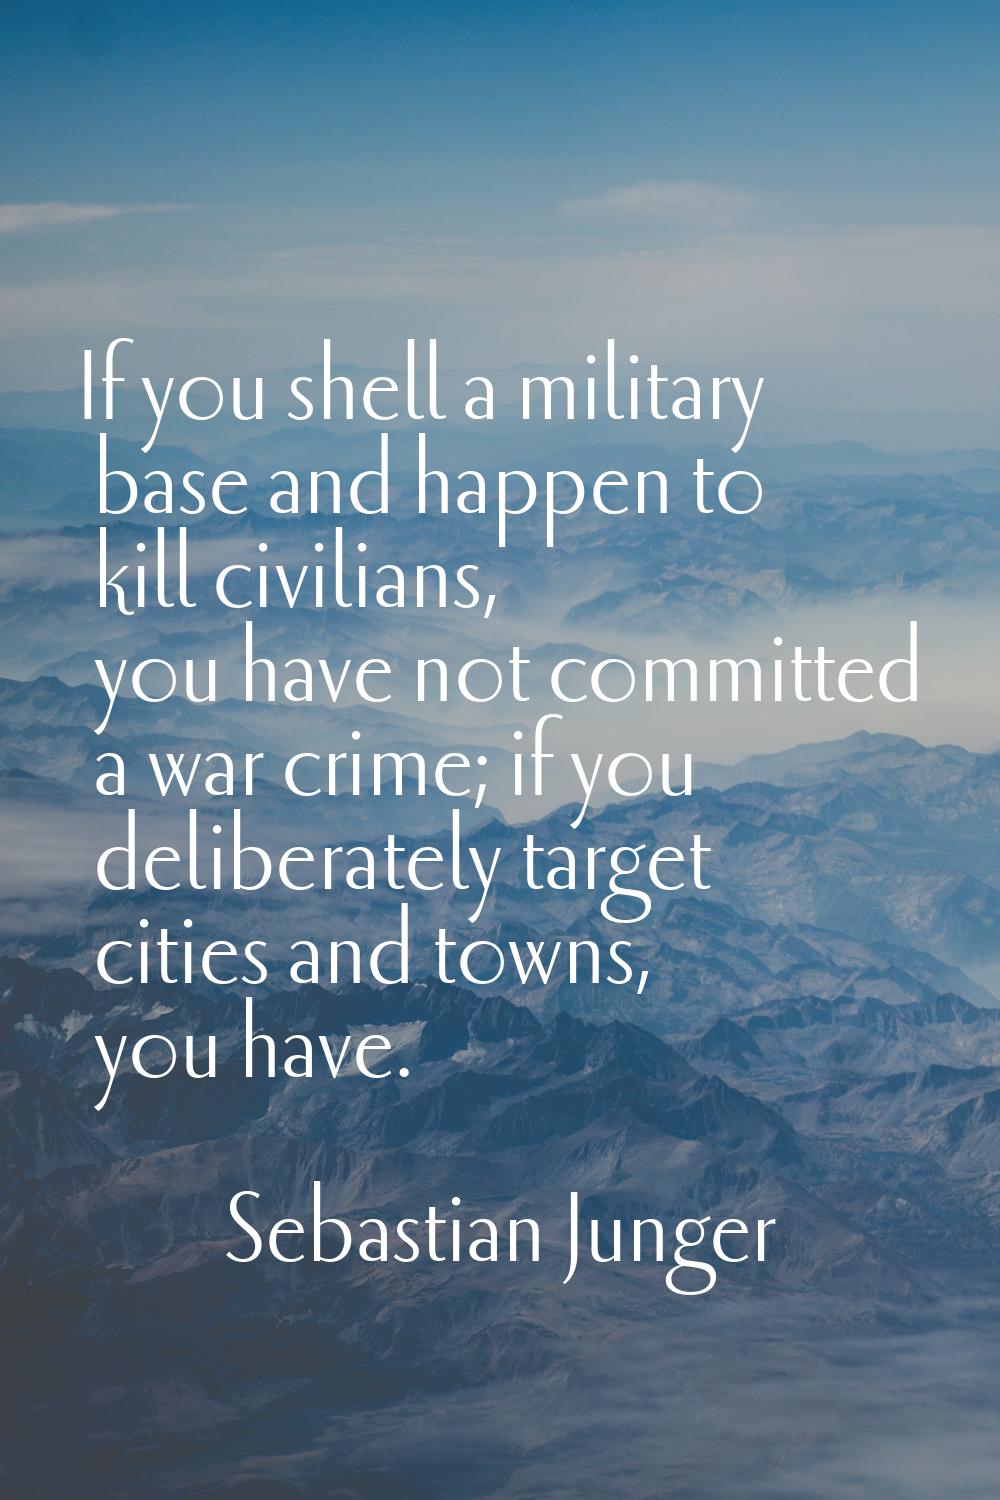 If you shell a military base and happen to kill civilians, you have not committed a war crime; if y